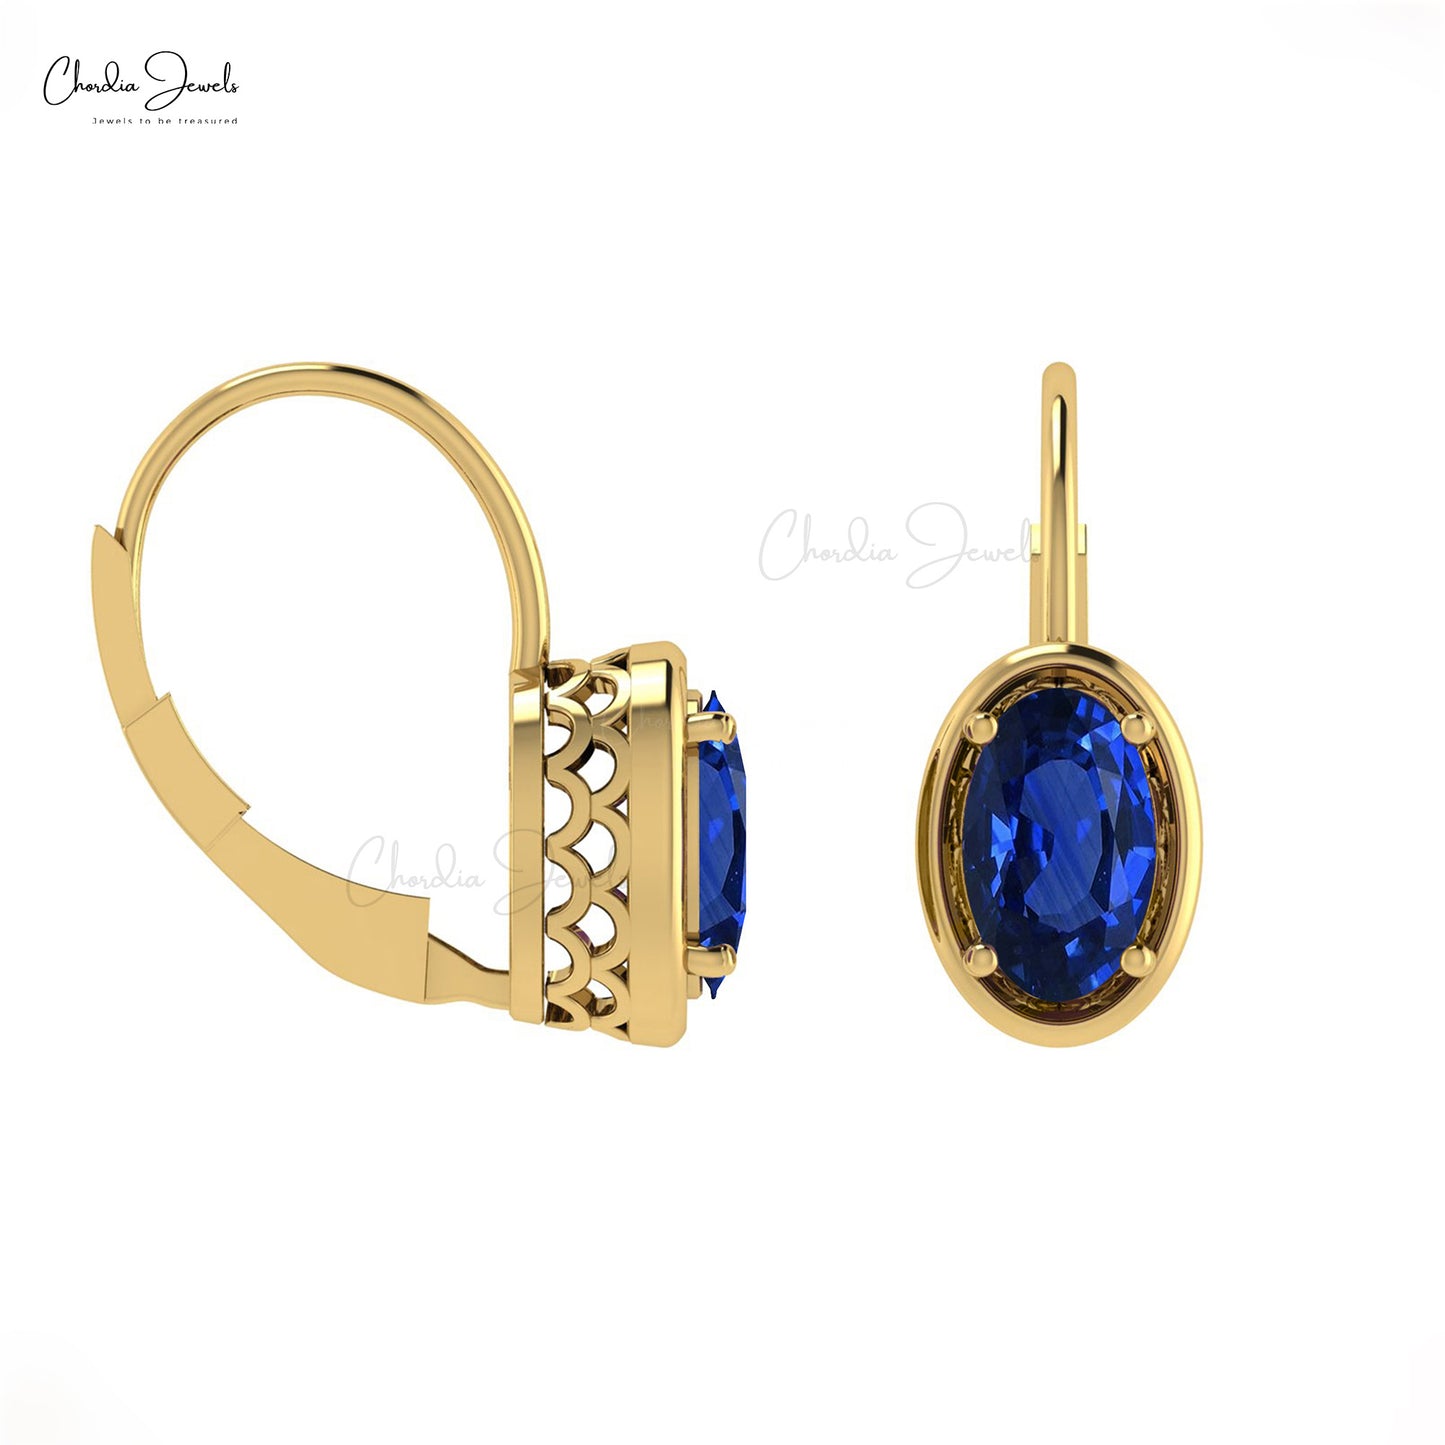 High Quality Minimalist Leverback Earrings Oval Shape Natural Blue Sapphire Gemstone Earring For Women 14k Solid Gold Light Weight Jewelry For Gift